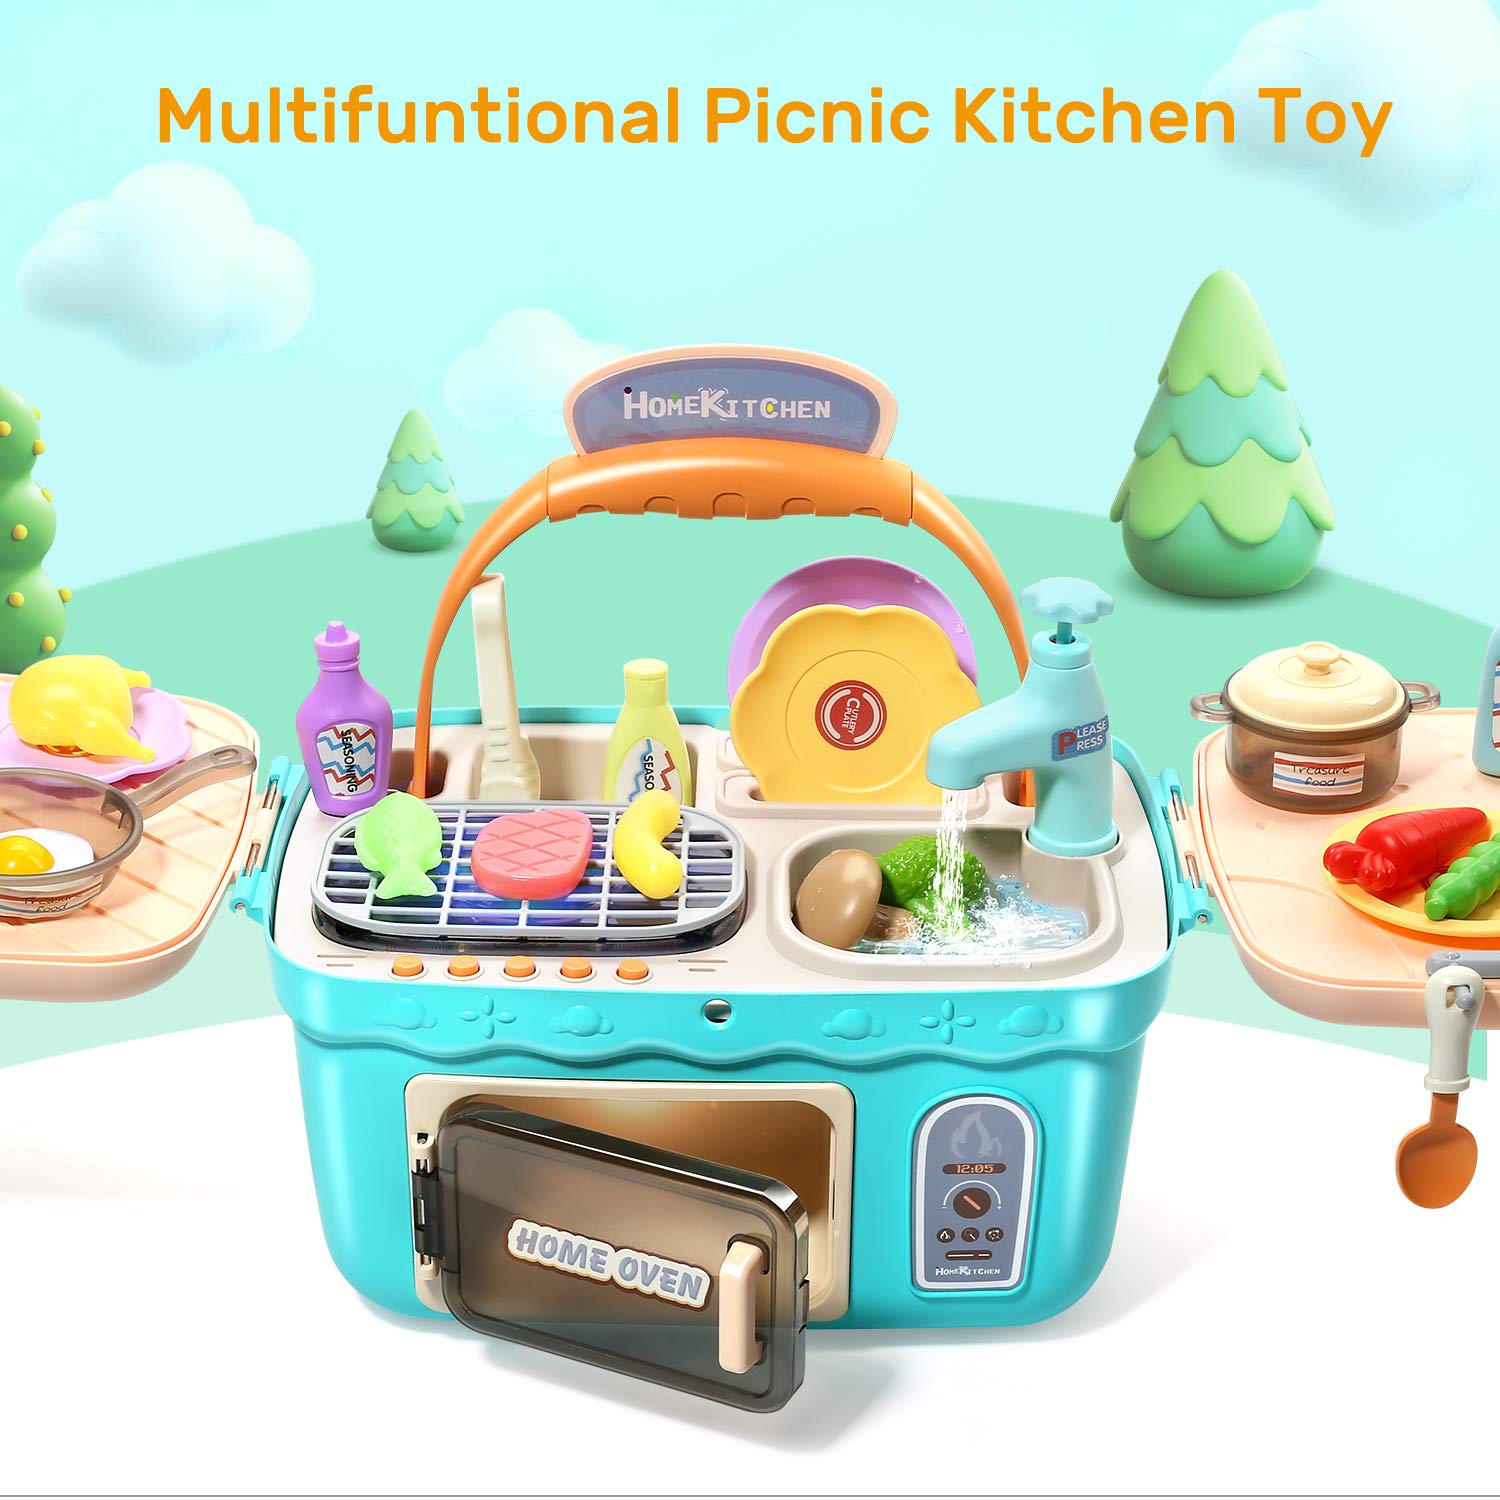 CUTE STONE Play Kitchen Accessories Toy, Play Food Sets for Kids Kitch